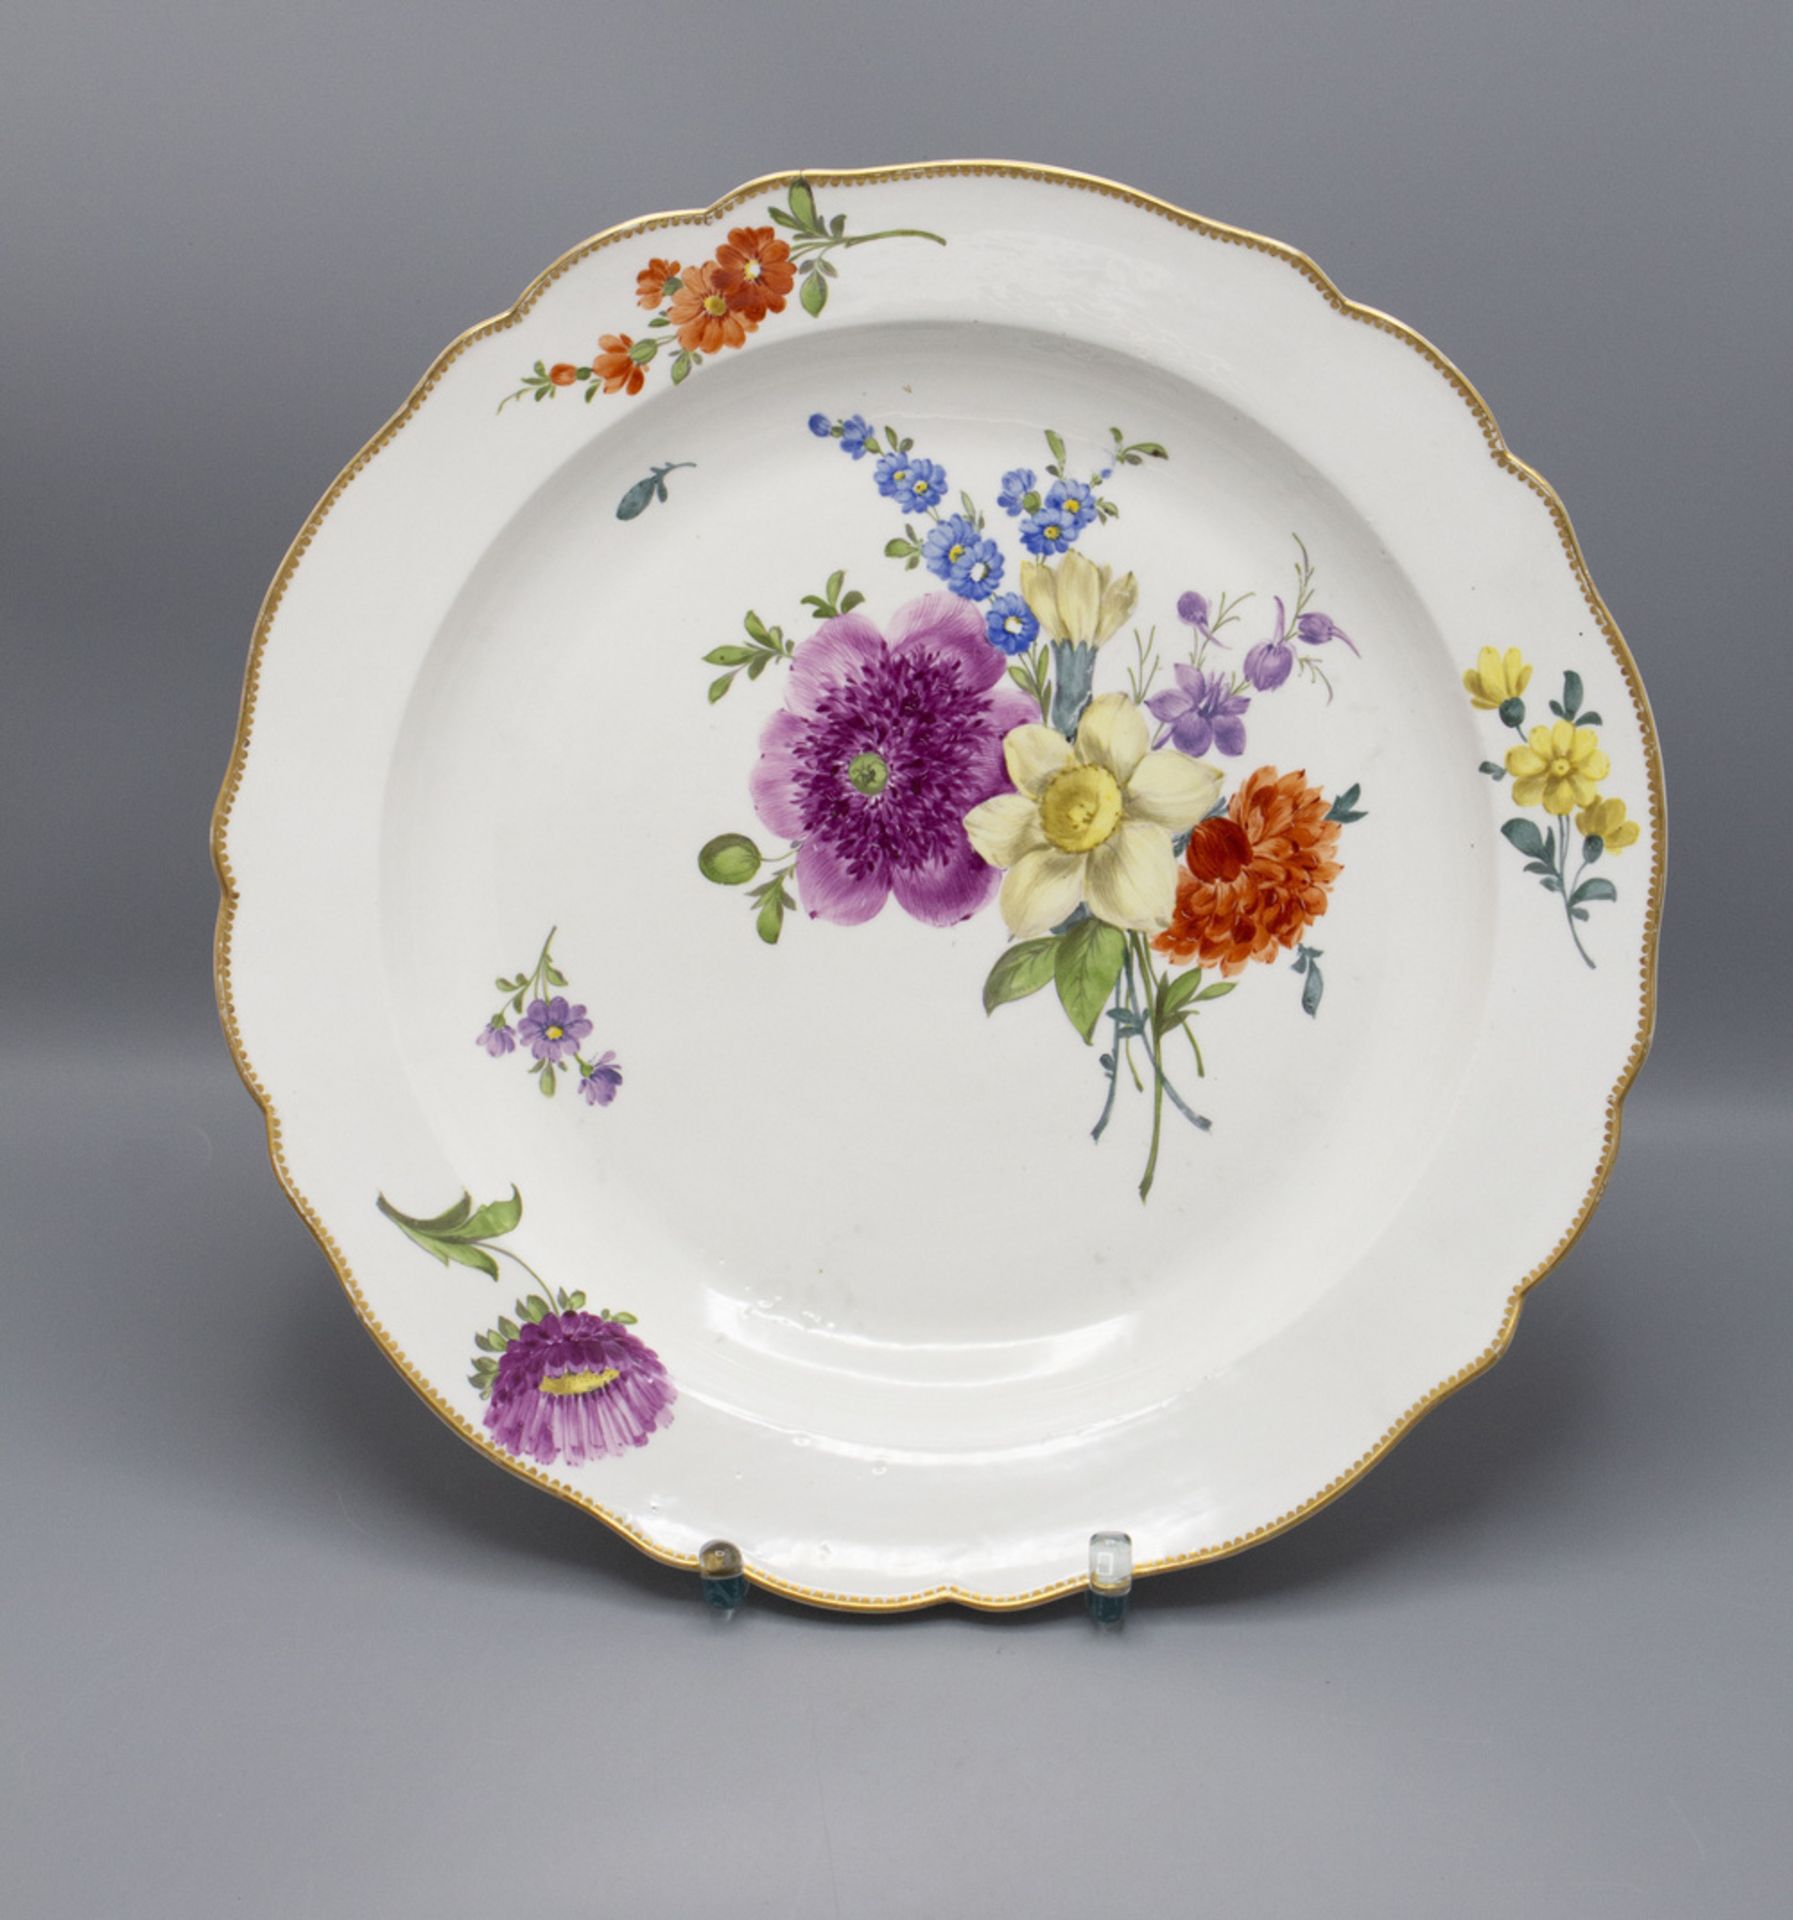 2 große Teller / 2 large plates, Meissen, Marcolini-Periode, 1774-1814 - Image 2 of 6